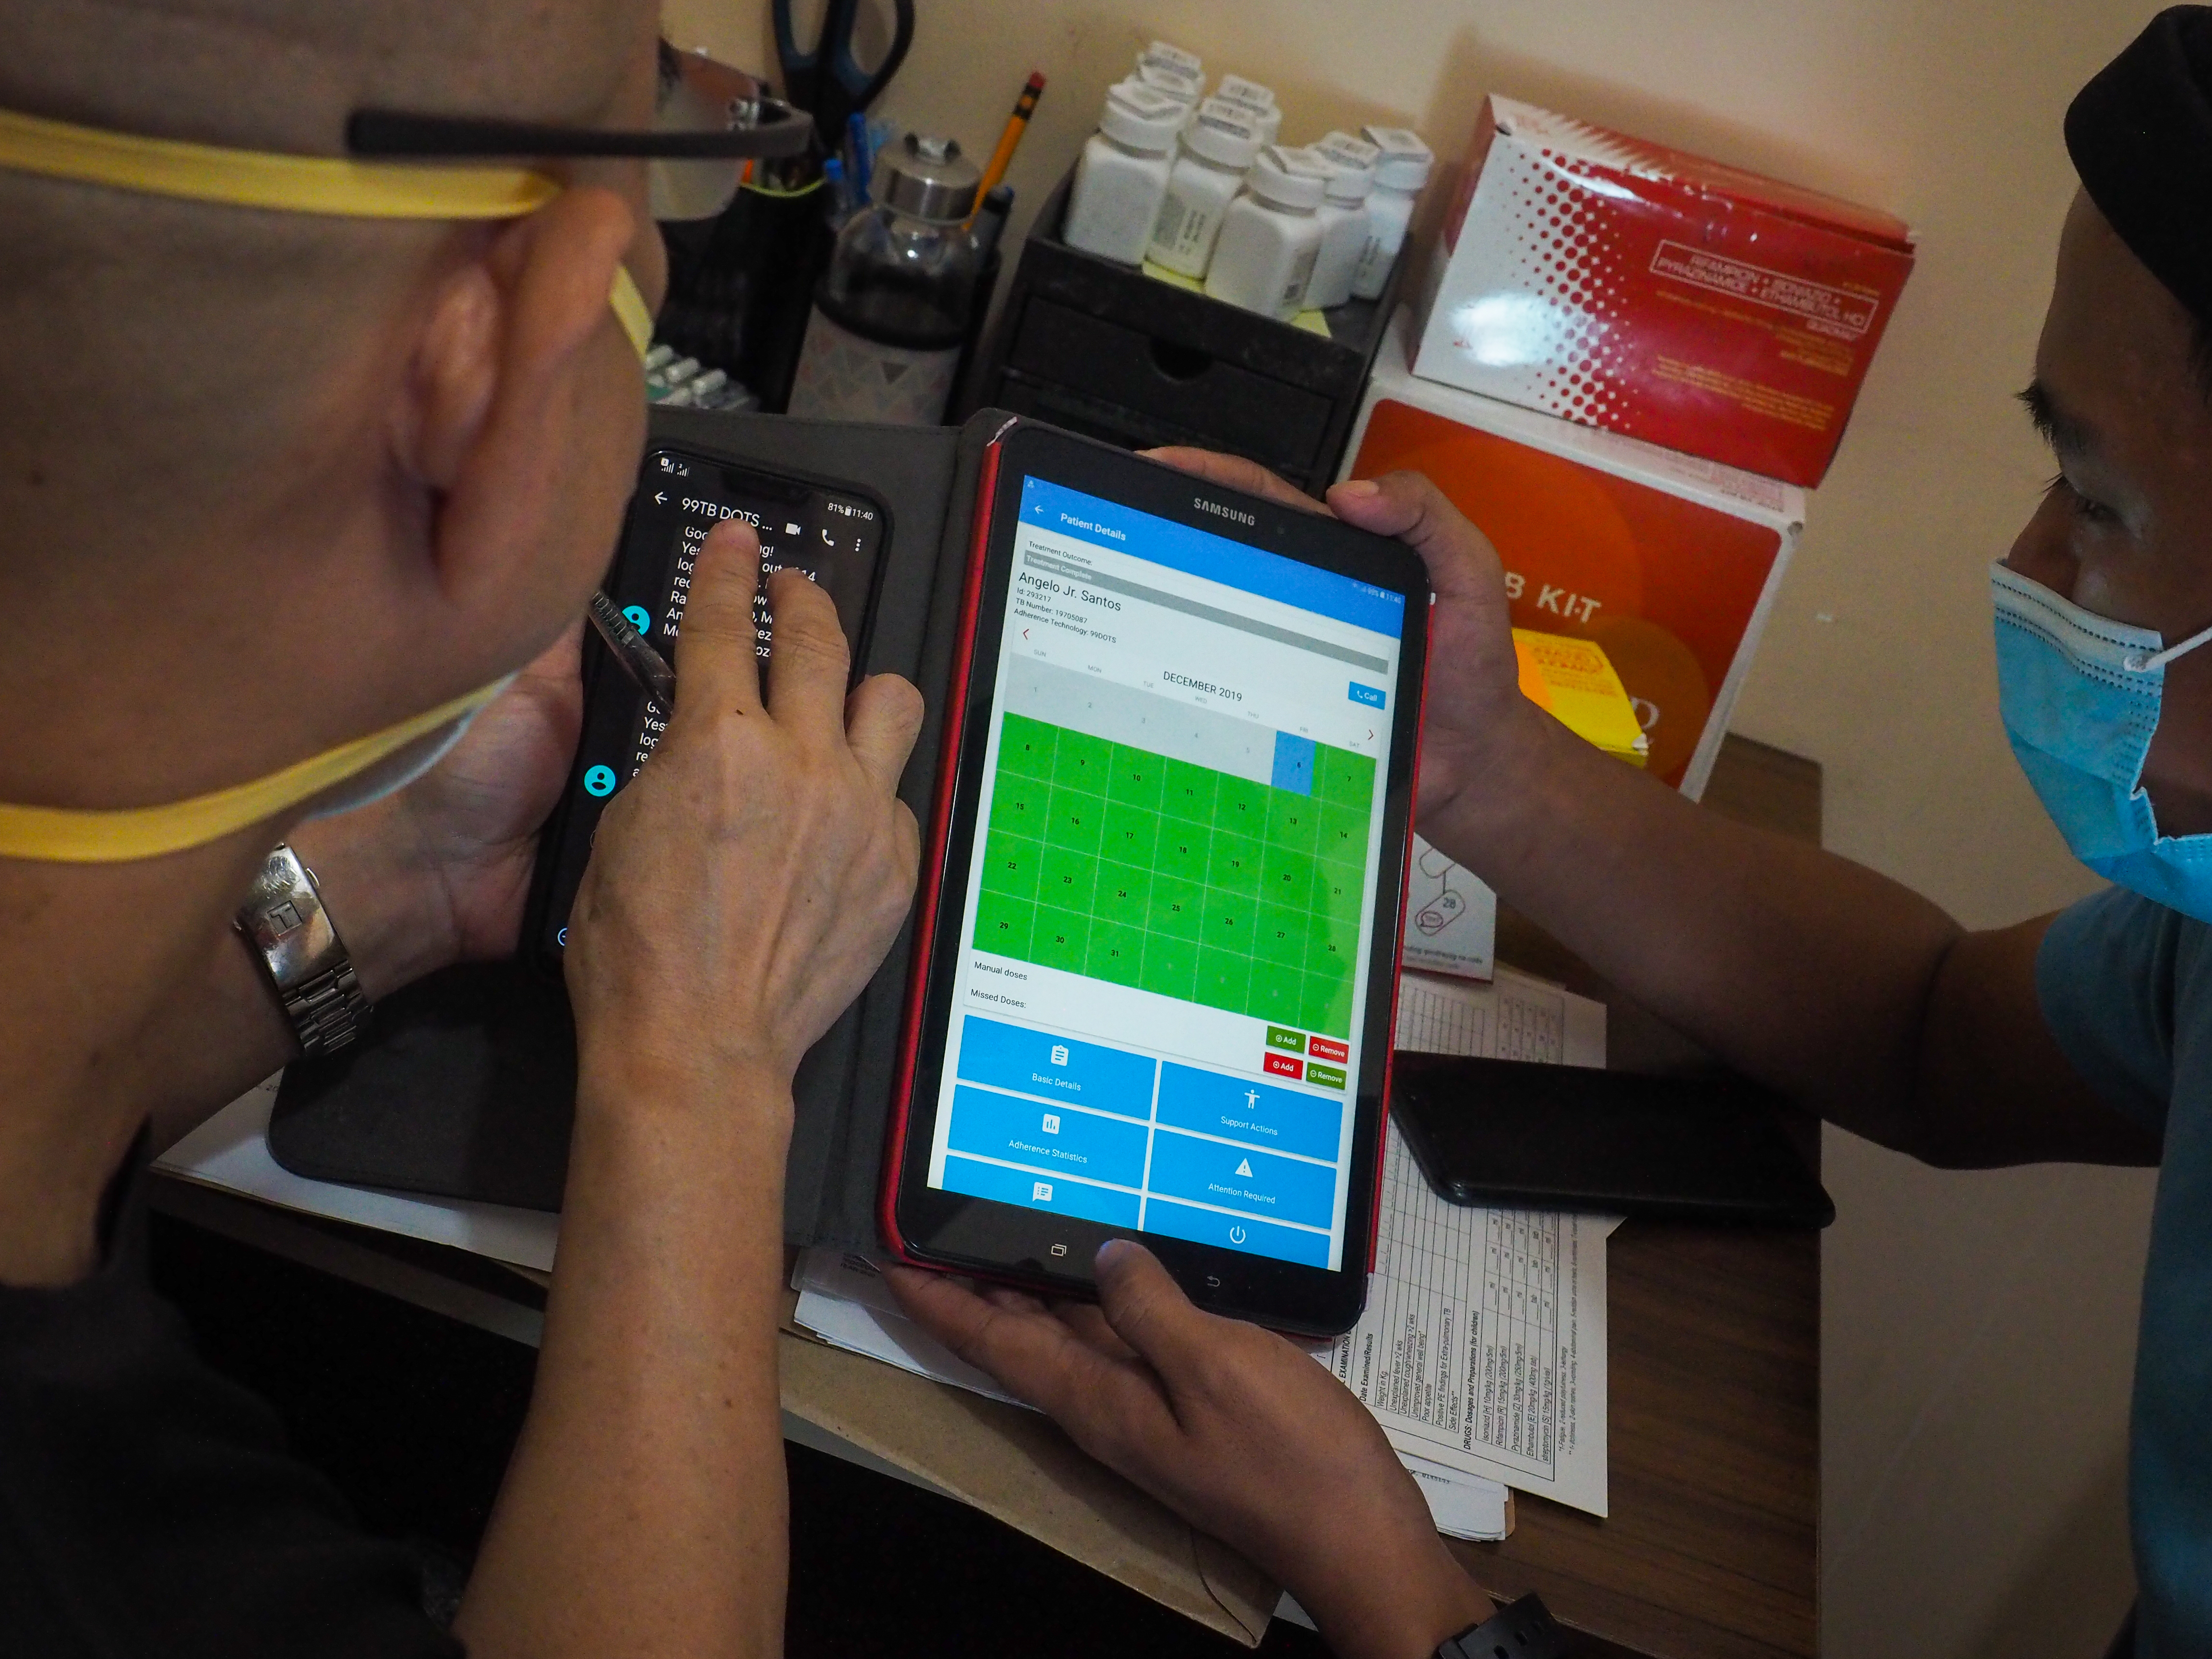 Adherence platform seen in tablet. Image showing healthcare providers reviewing the adherence rates.